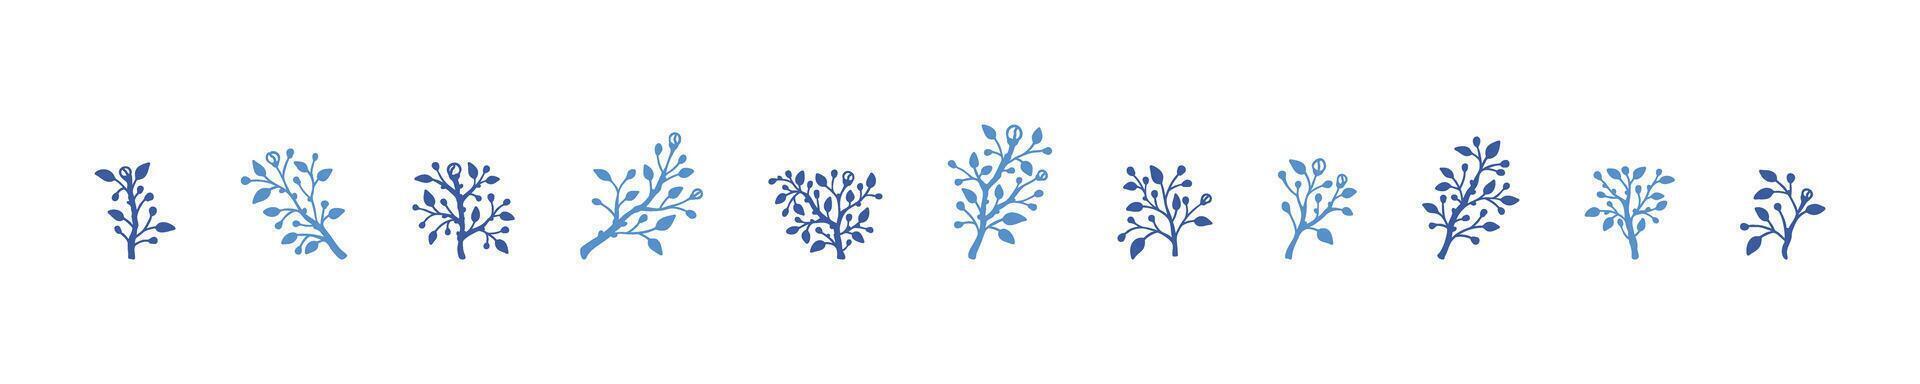 Minimalist silhouette branches with leaves and buds set. Icons and design elements for floral logo, modern wedding invitations, feminine designs, greeting cards, tattoo. Abstract plant twig. vector